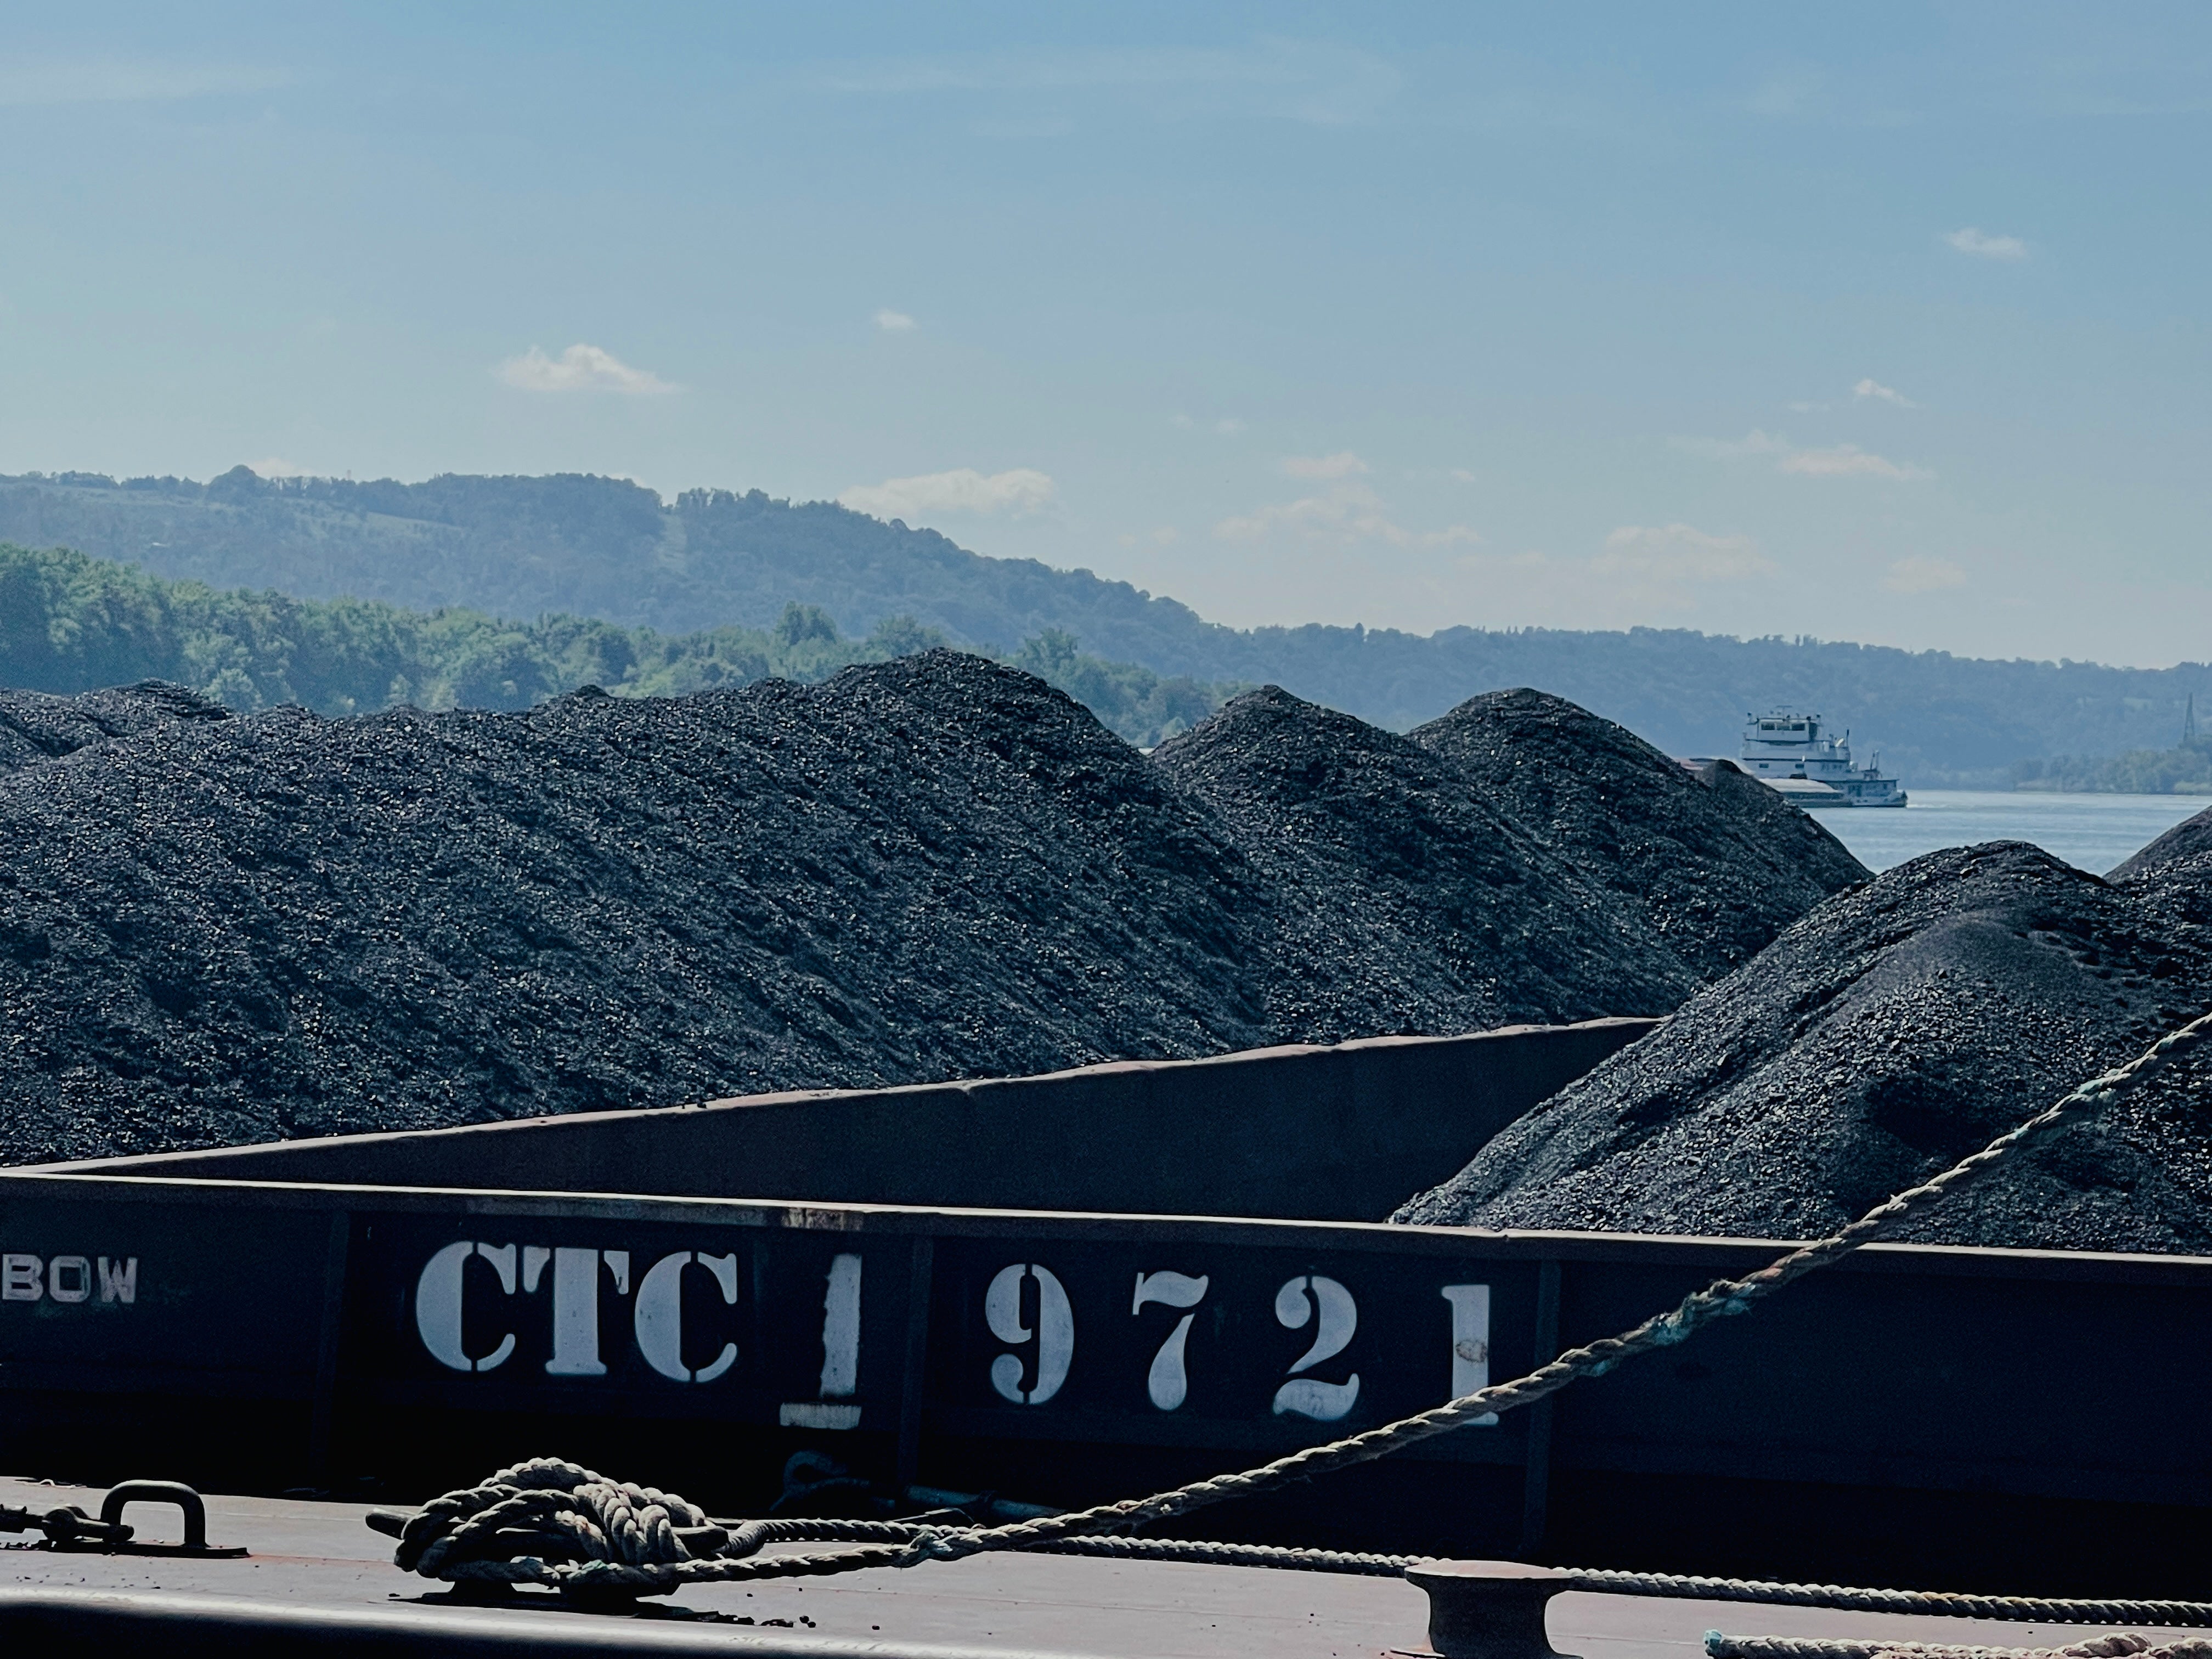 Coal arriving on barges at Cardinal Plant in Brilliant, Ohio.